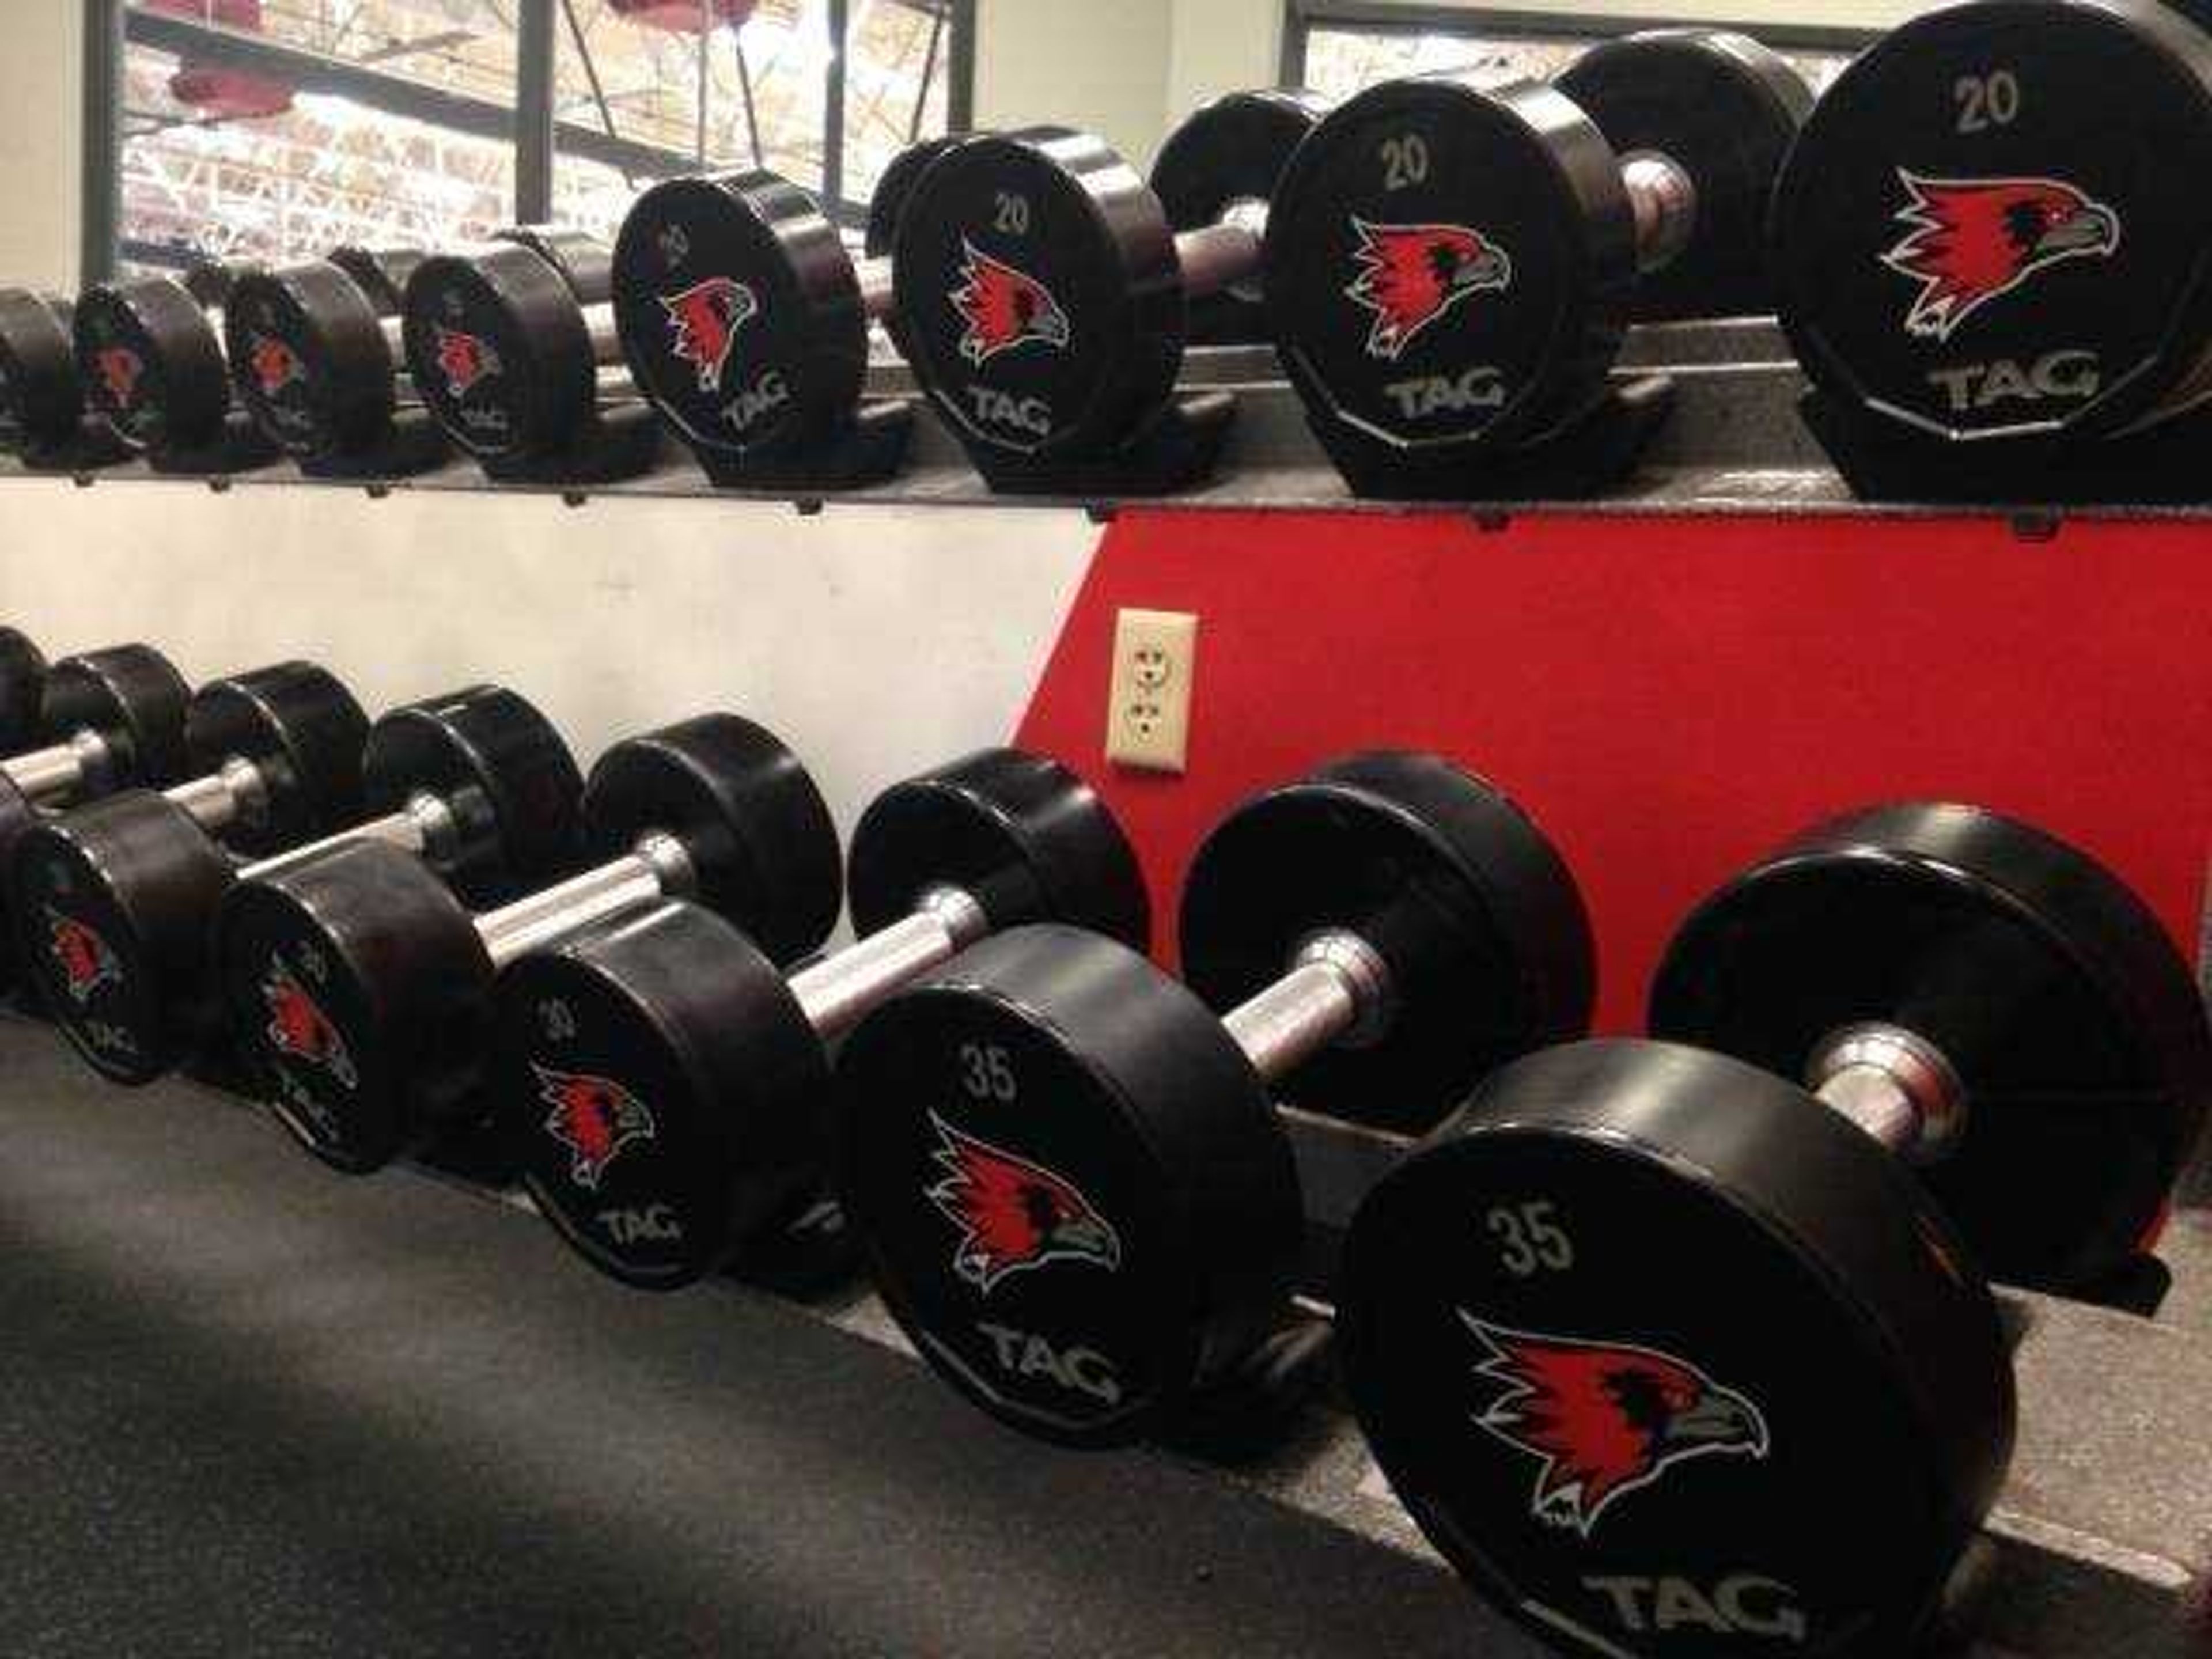 New dumbbells were added in the weight room with Southeast branding in the recreation centers.